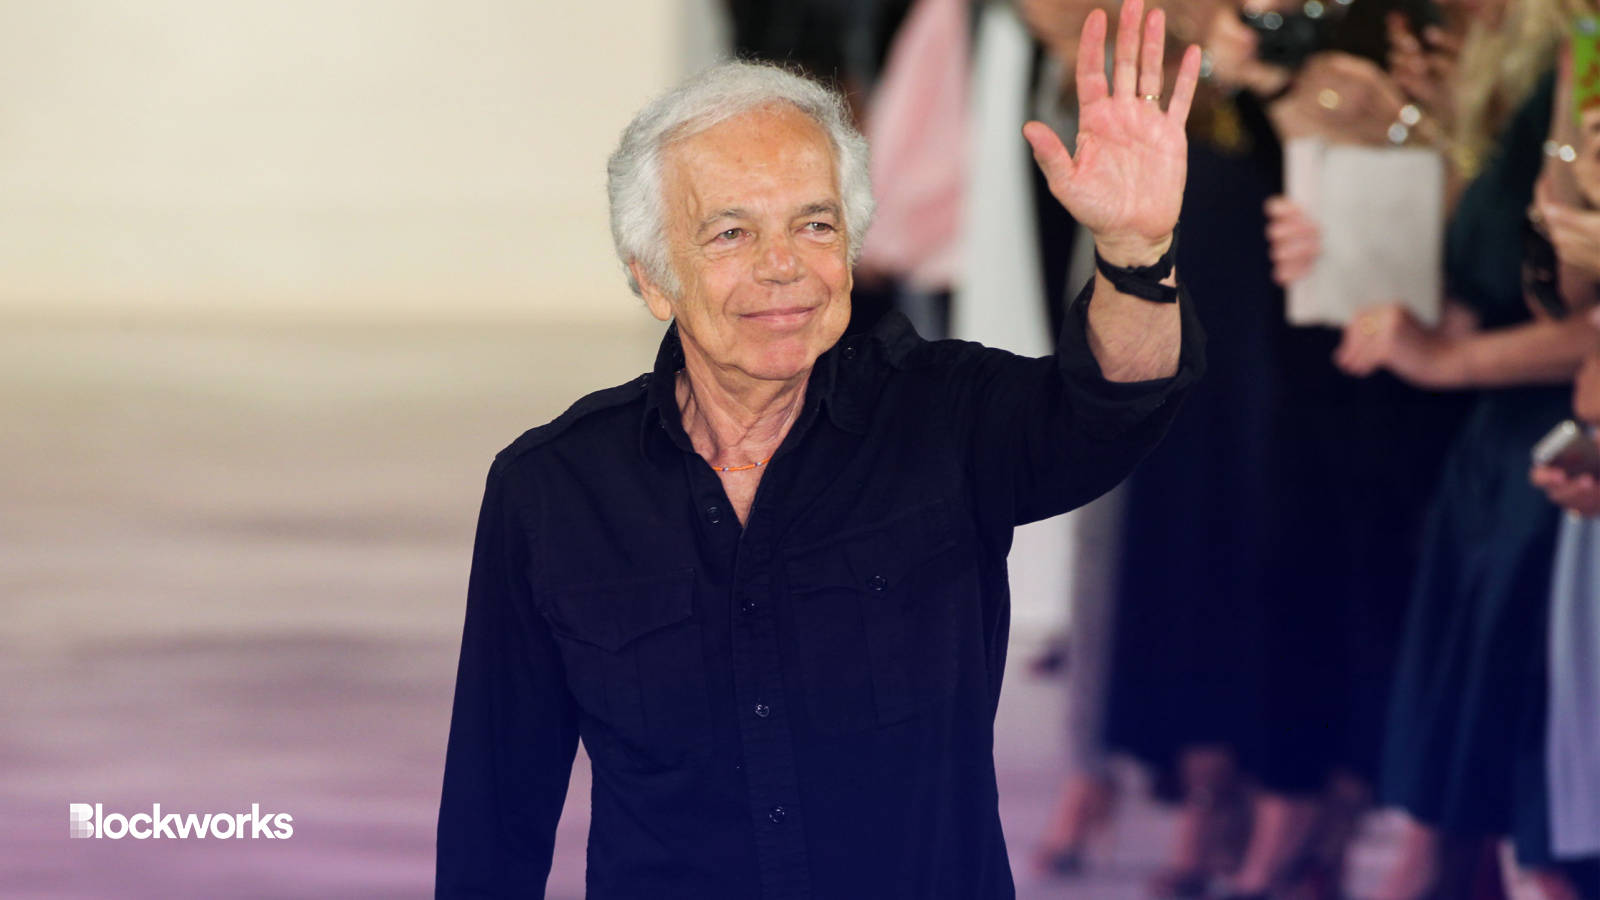 Ralph Lauren Opens A New Store In Miami That Accepts Crypto Payments -   - P2E NFT Games Portal